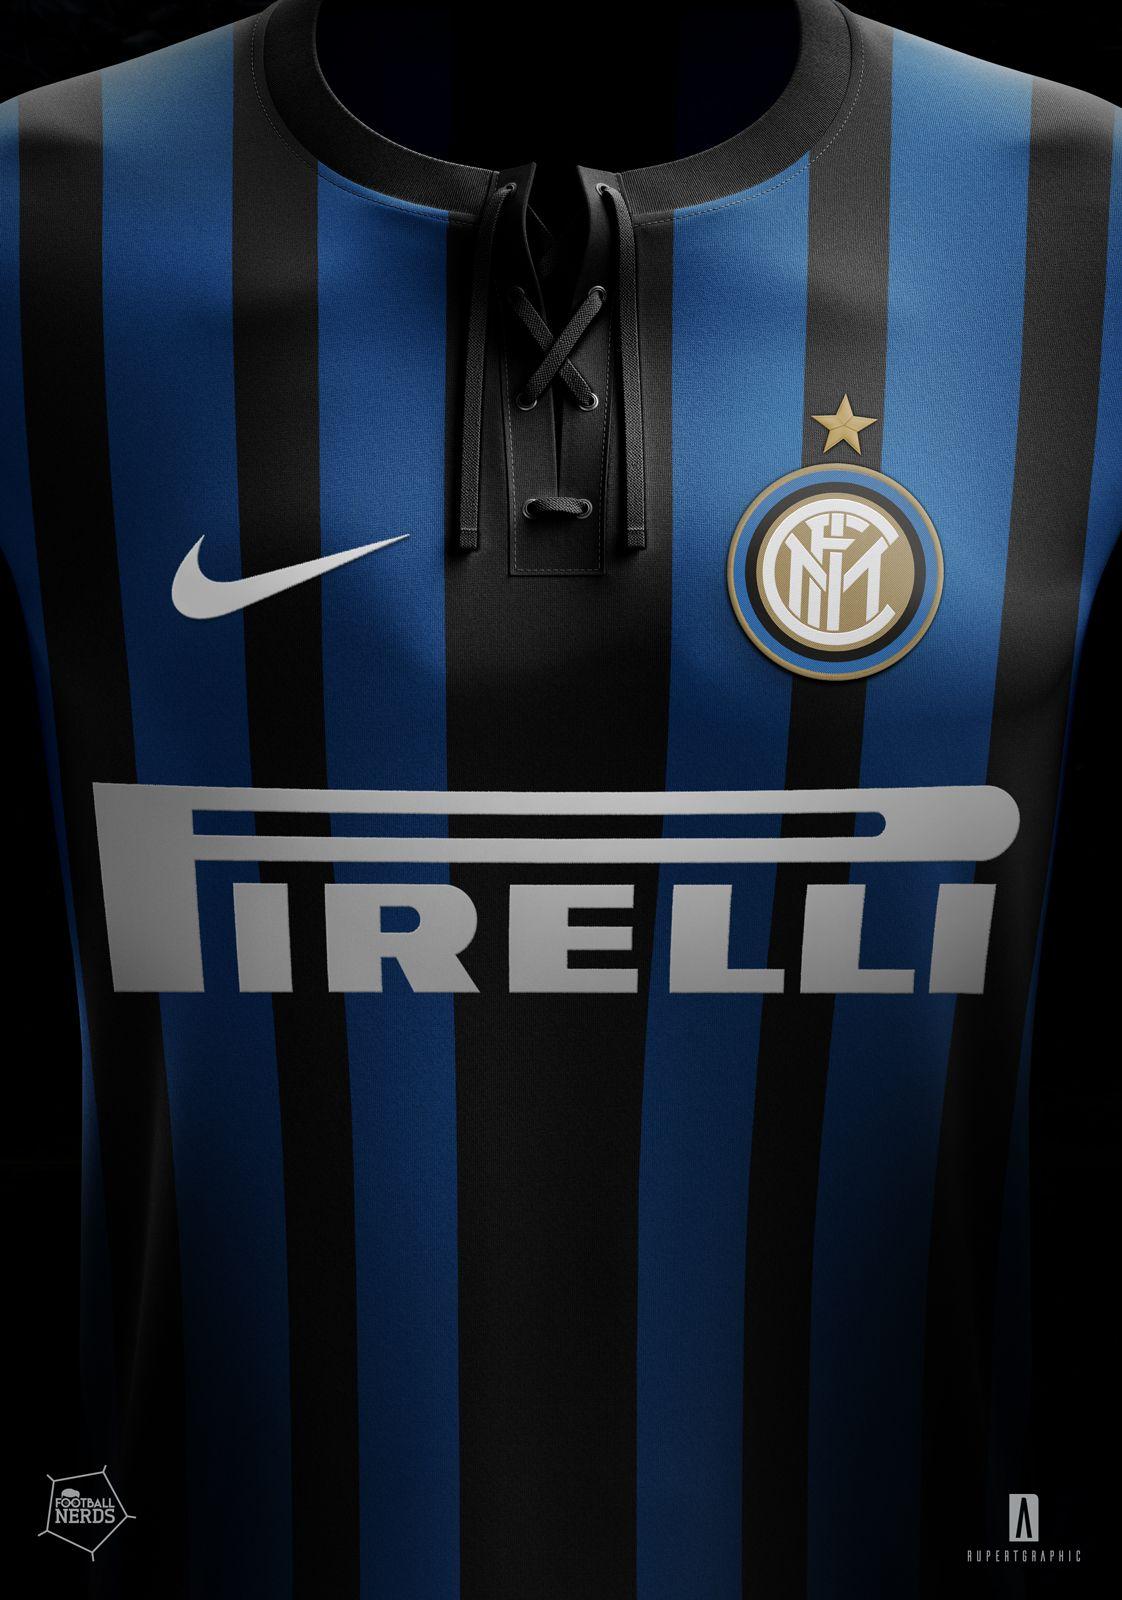 The New Inter Milan 2017 2018 Jersey Will Introduce A Unique Stripes